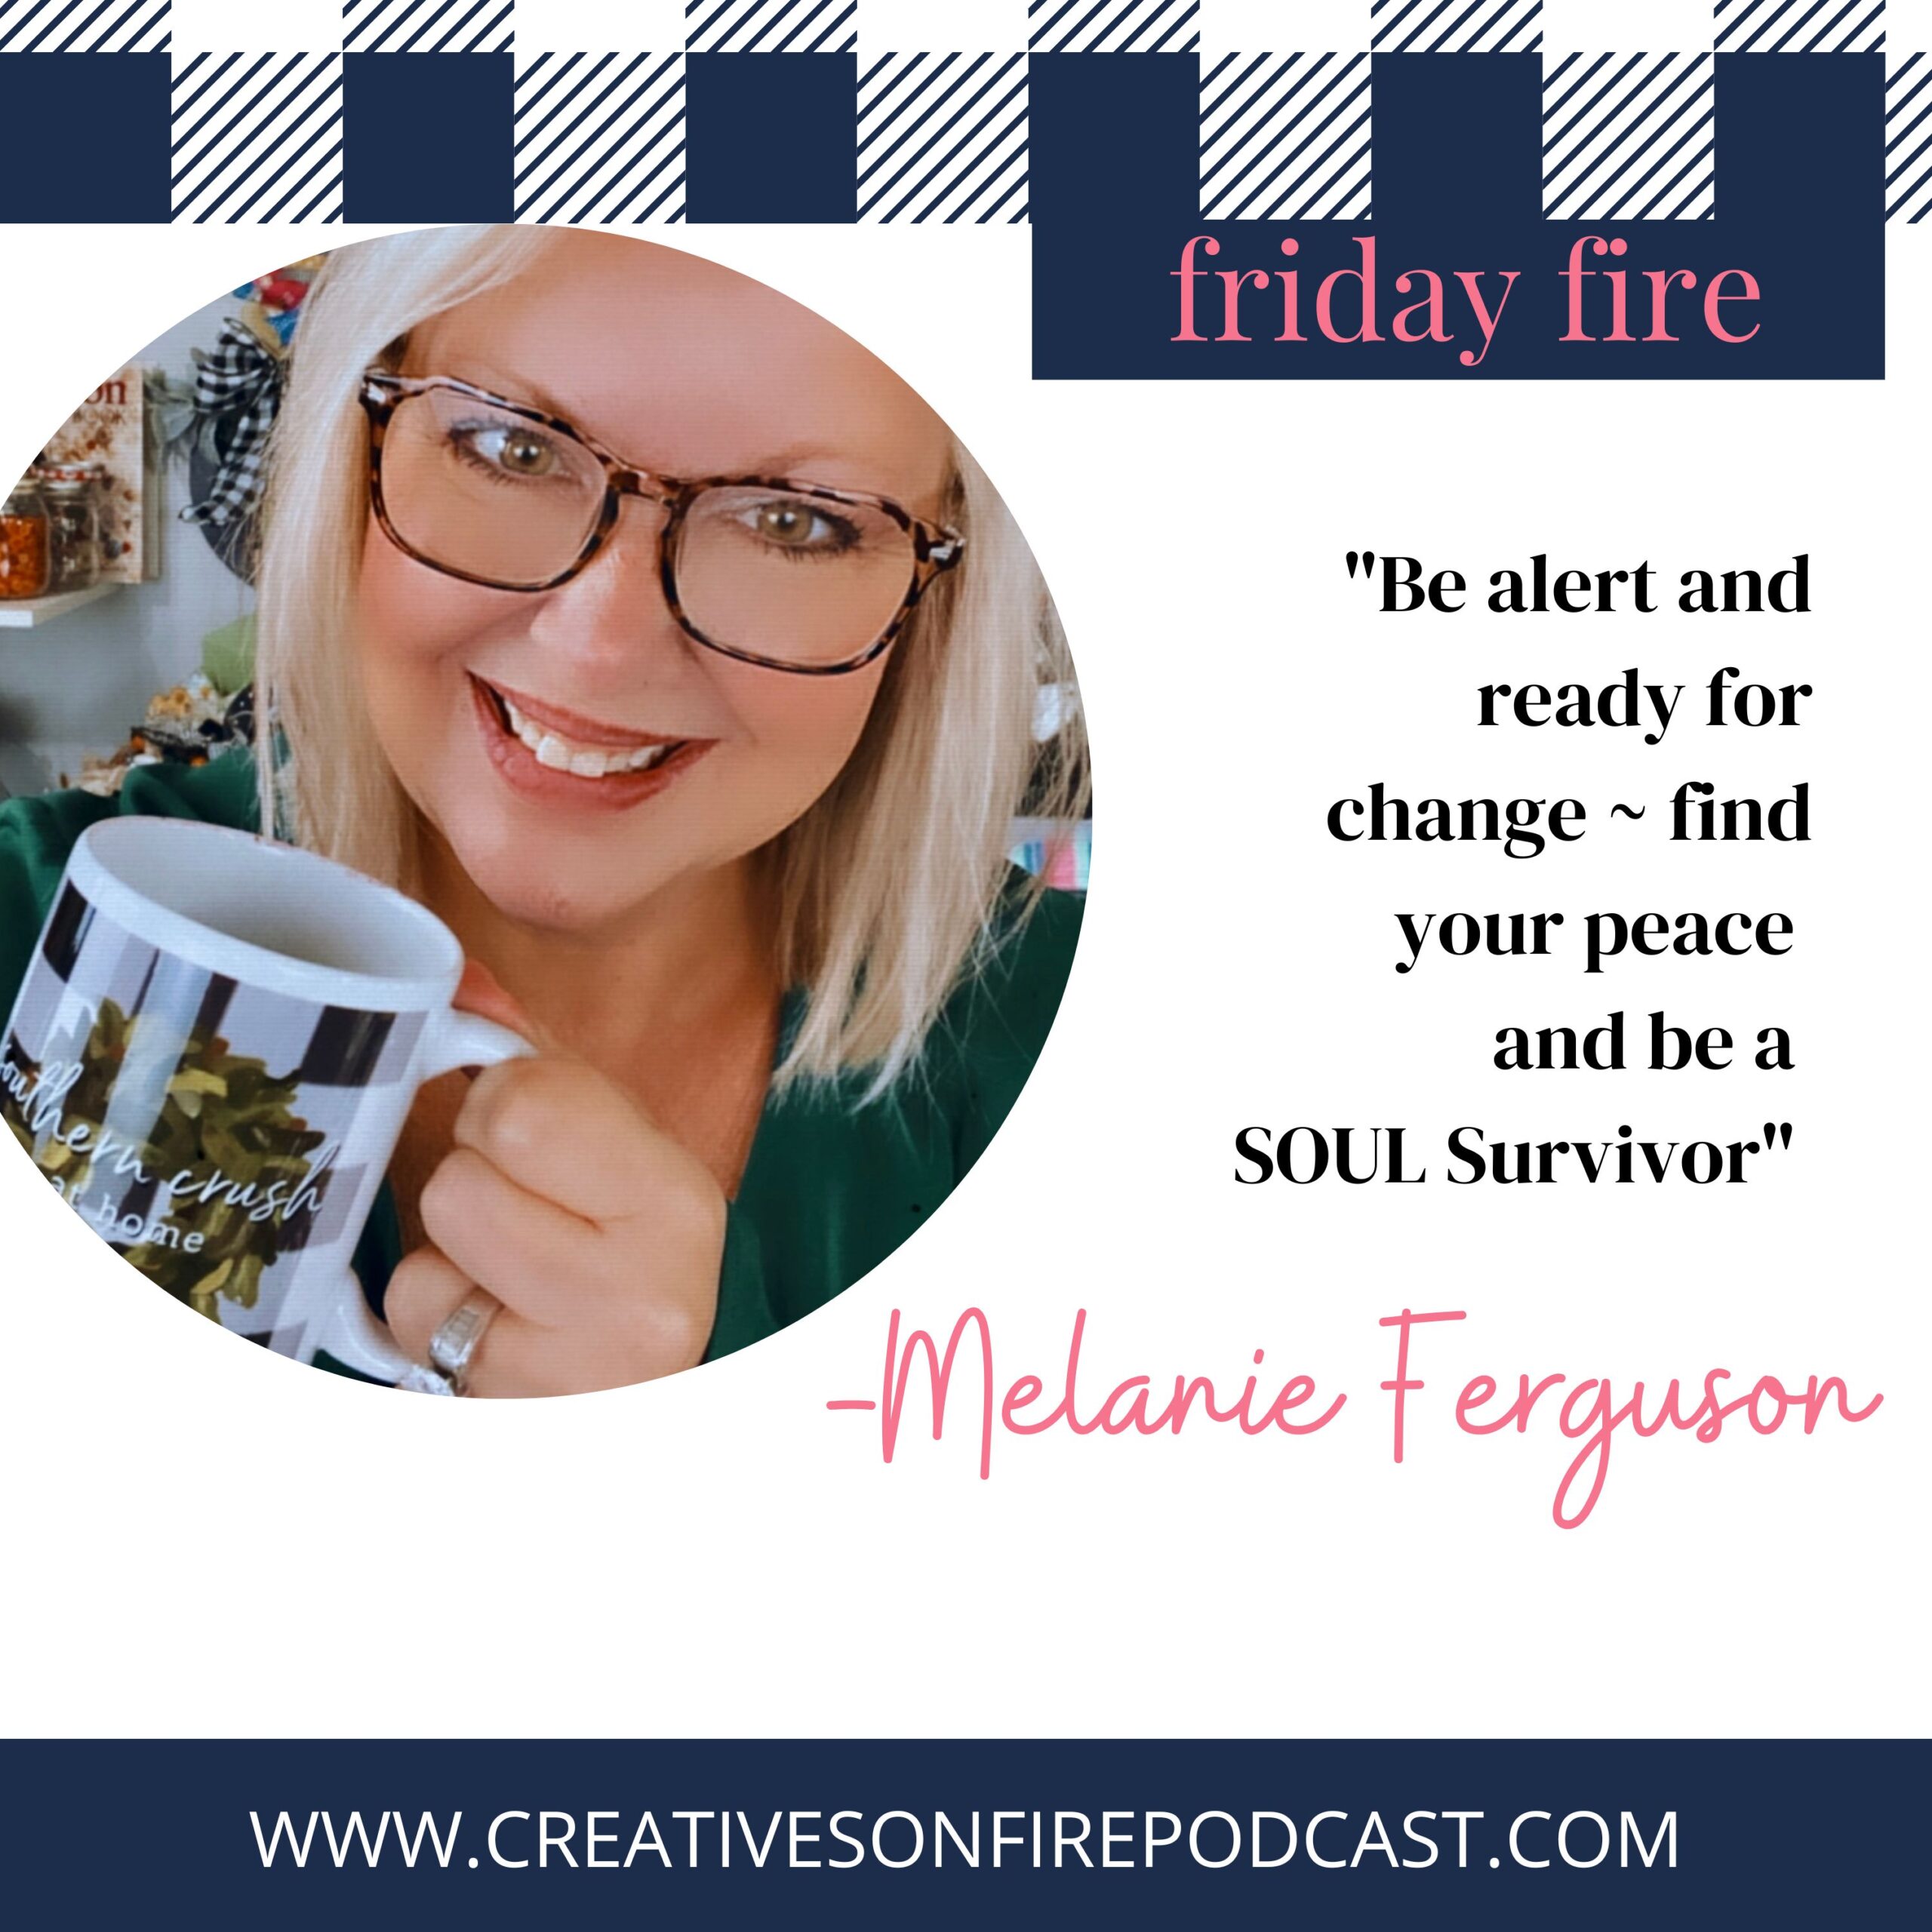 Friday Fire Bonus: 5 Ways to Find Peace in Today’s World